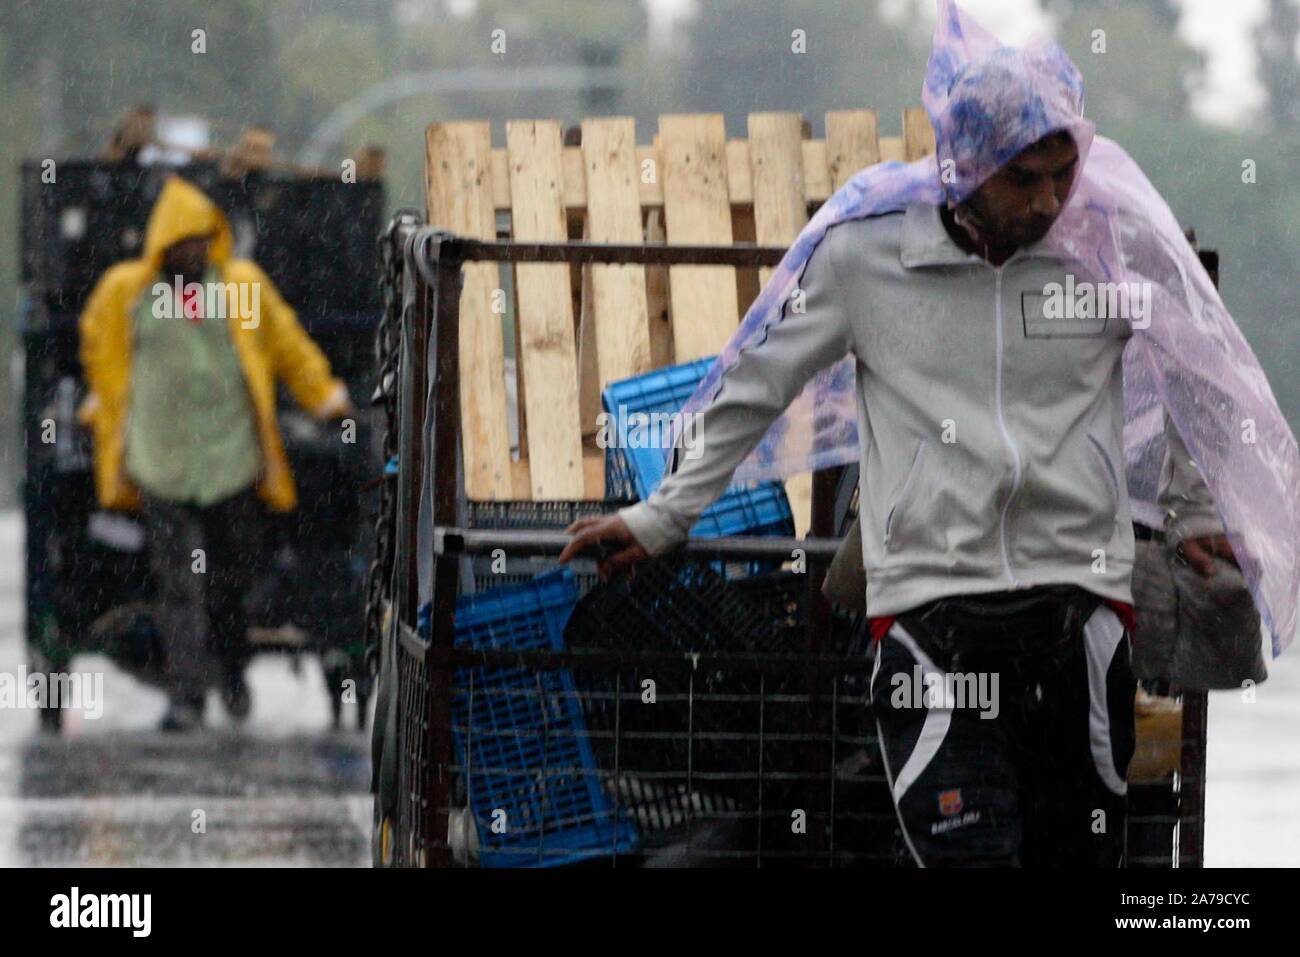 October 31, 2019, Athens, Greece: Men with cart collecting cardboard and rubbish on streets into the rain in the center of Athens. (Credit Image: © Aristidis VafeiadakisZUMA Wire) Stock Photo